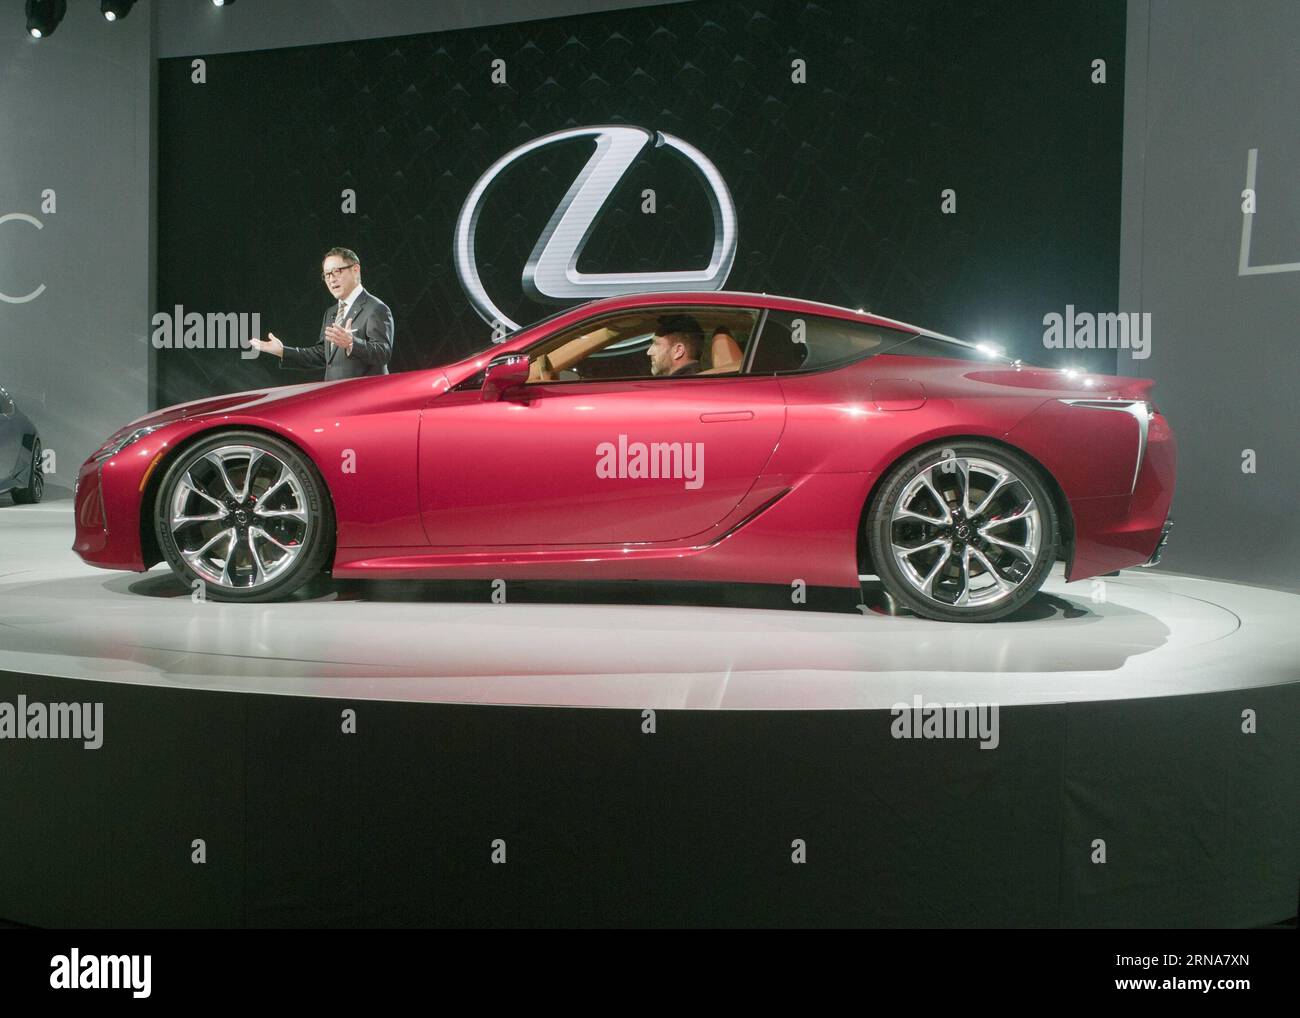 (160112) -- DETROIT, Jan. 11, 2016 -- Toyota Motor Co. CEO Akio Toyoda introduces new version of the Lexus LC 500 at the North American International Auto Show (NAIAS) in Detroit, the United States, Jan. 11, 2016. ) U.S.-DETROIT-NAIAS-PRESS CONFERENCE HexXianfeng PUBLICATIONxNOTxINxCHN   160112 Detroit Jan 11 2016 Toyota Engine Co CEO Akio Toyoda introduces New Version of The Lexus LC 500 AT The North American International Car Show NAIAS in Detroit The United States Jan 11 2016 U S Detroit NAIAS Press Conference HexXianfeng PUBLICATIONxNOTxINxCHN Stock Photo